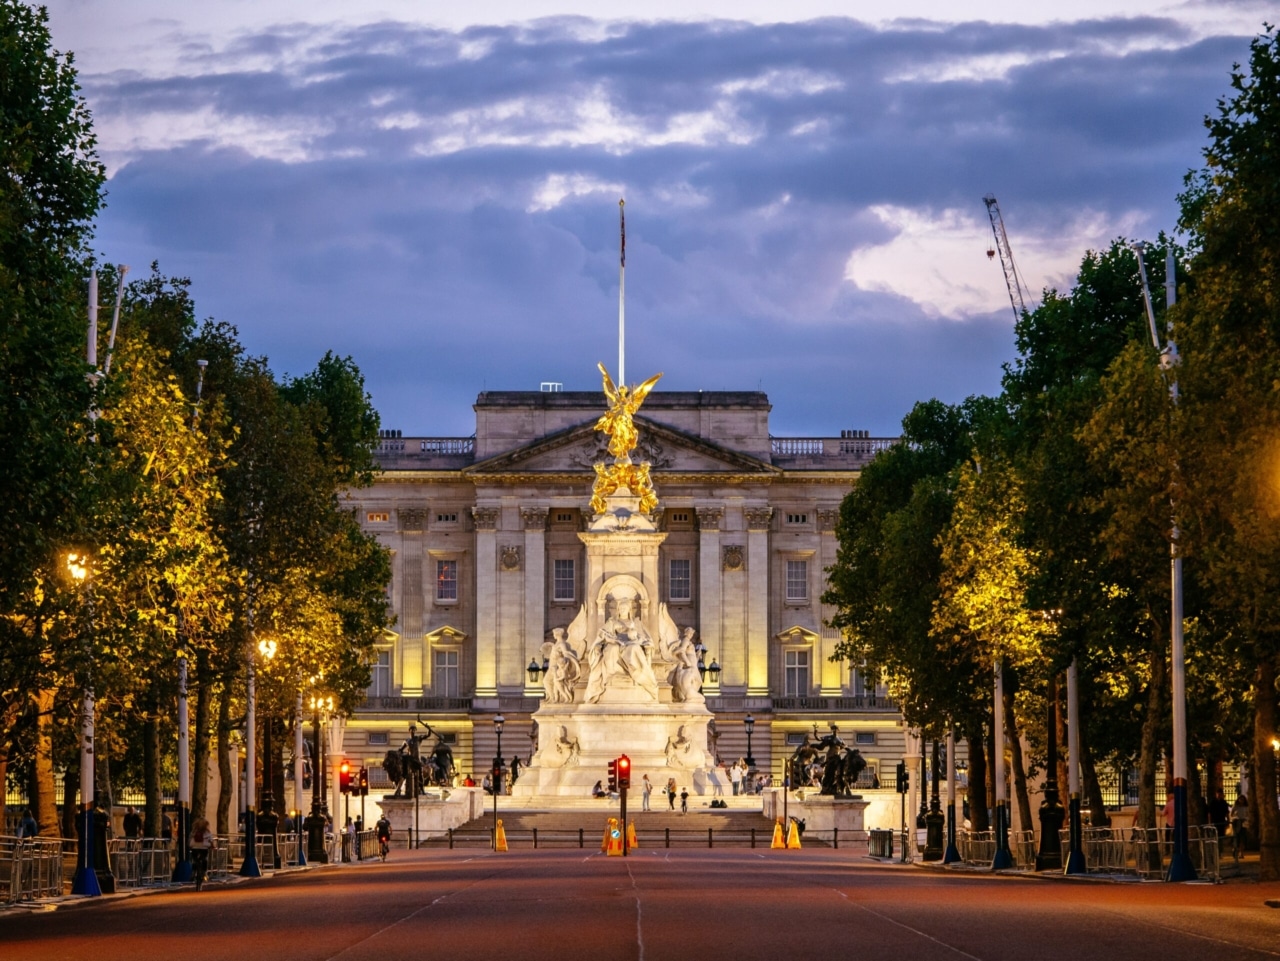 Buckingham Palace, view from The Mall